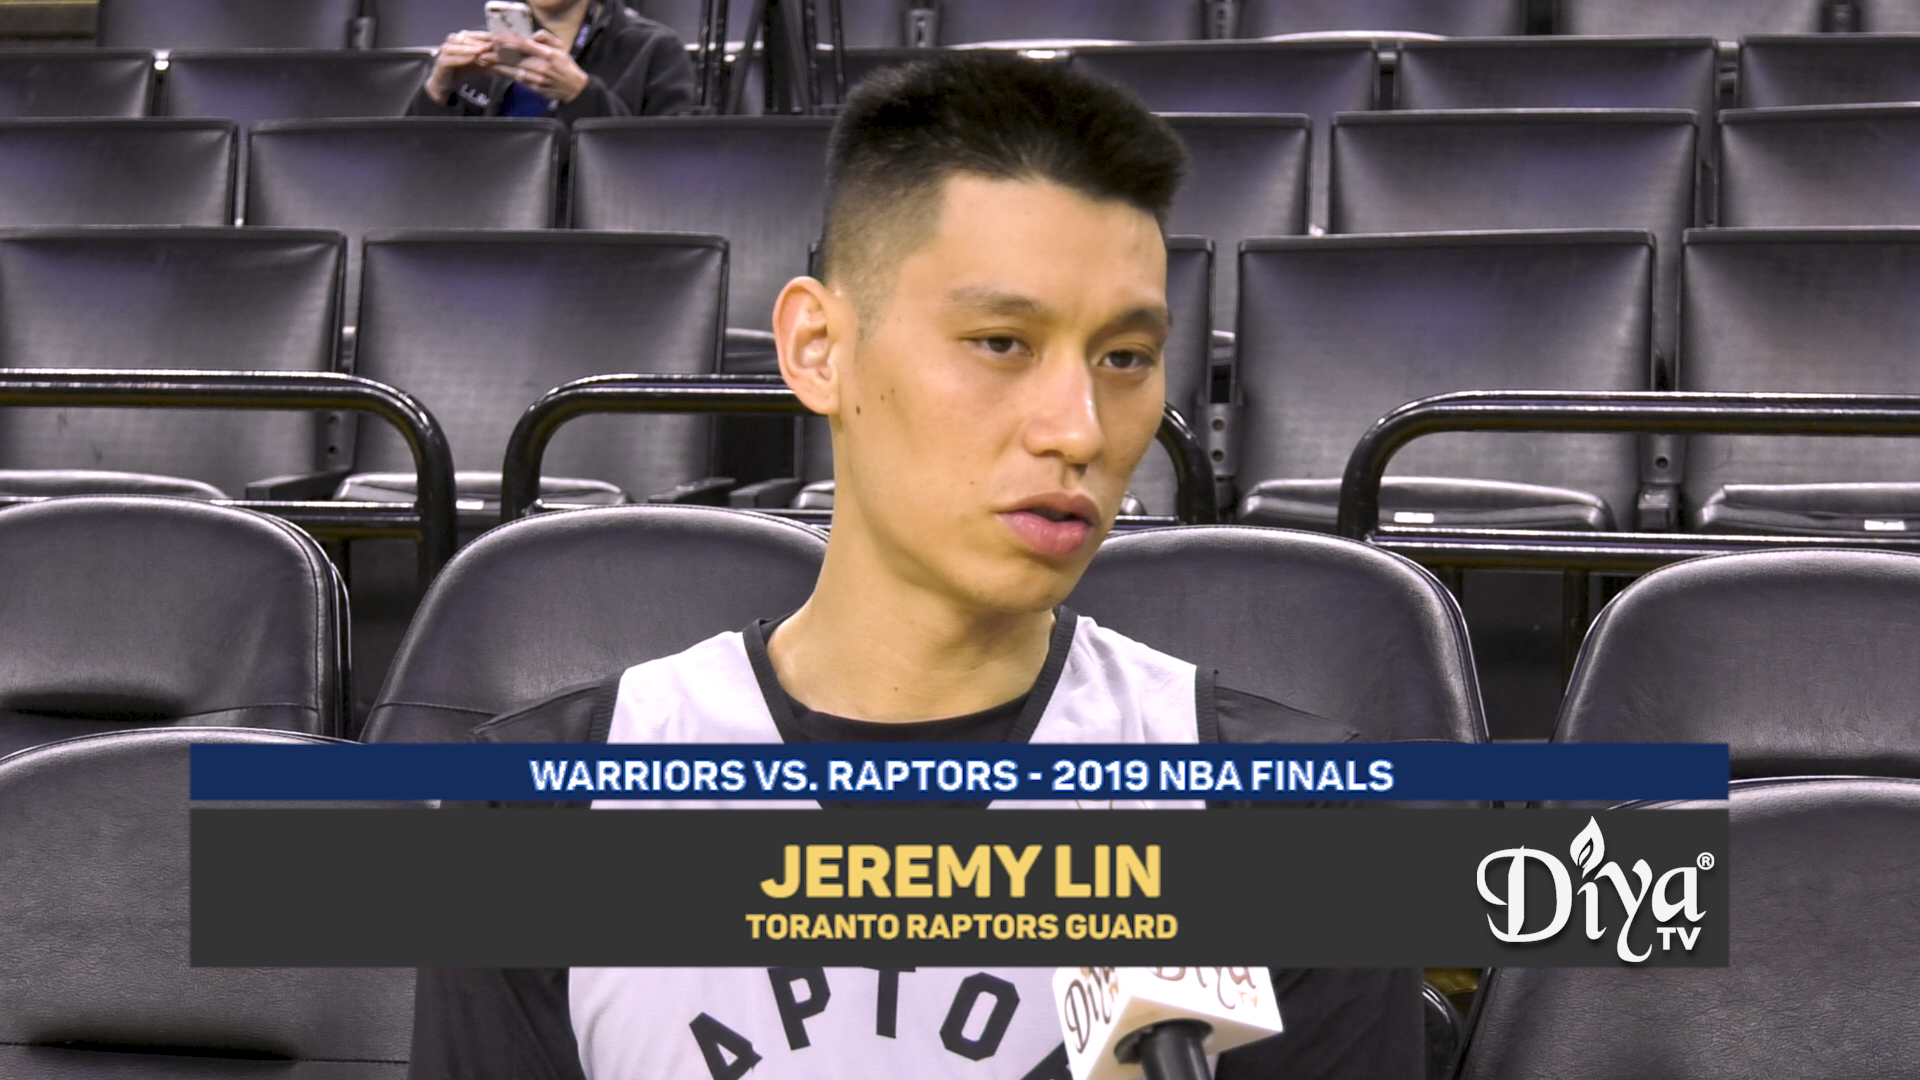 Linsanity Next Chapter